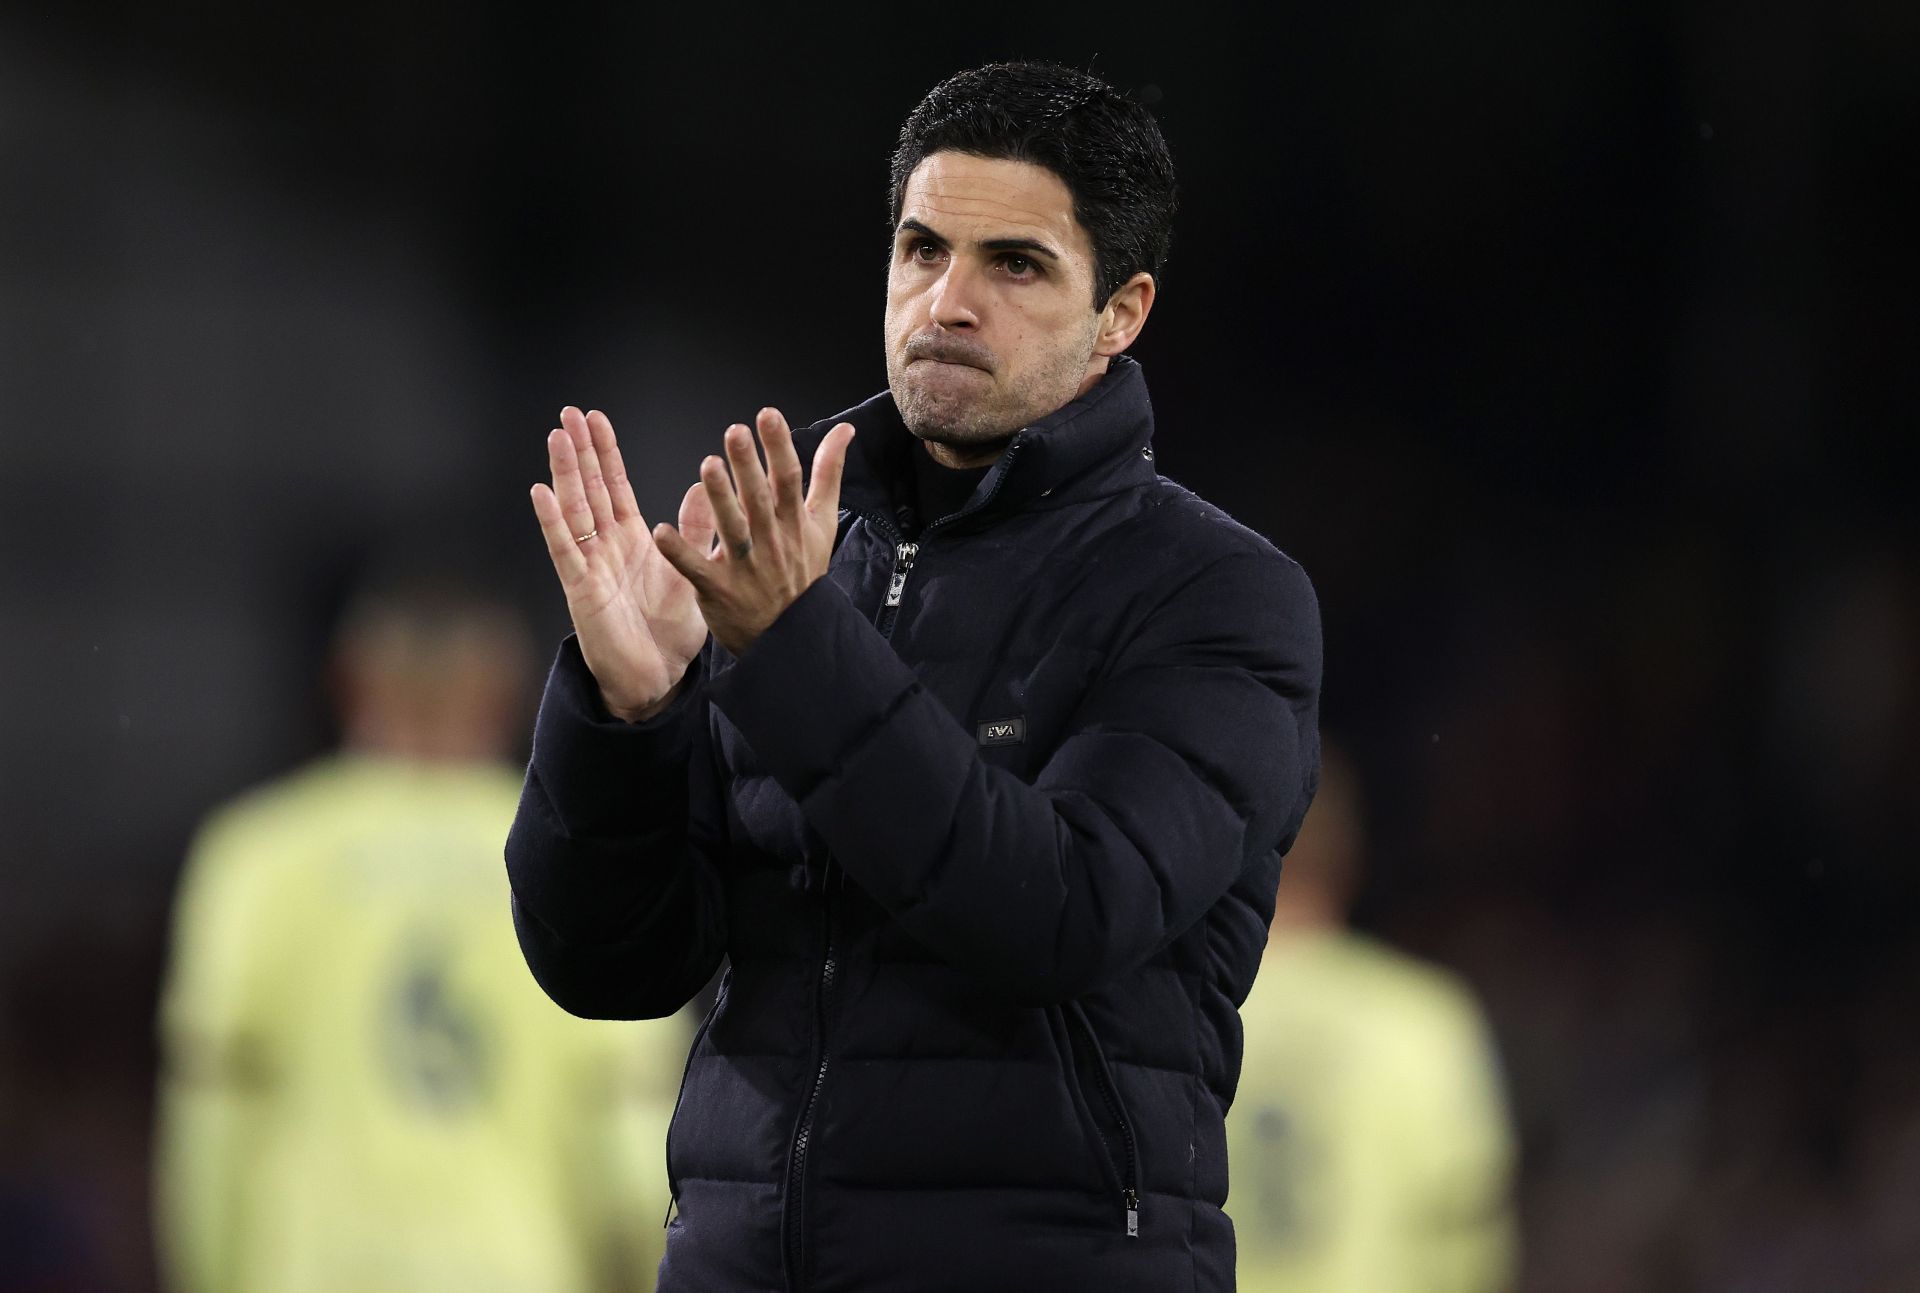 Arsenal manager Mikel Arteta endured a night to forget against Crystal Palace